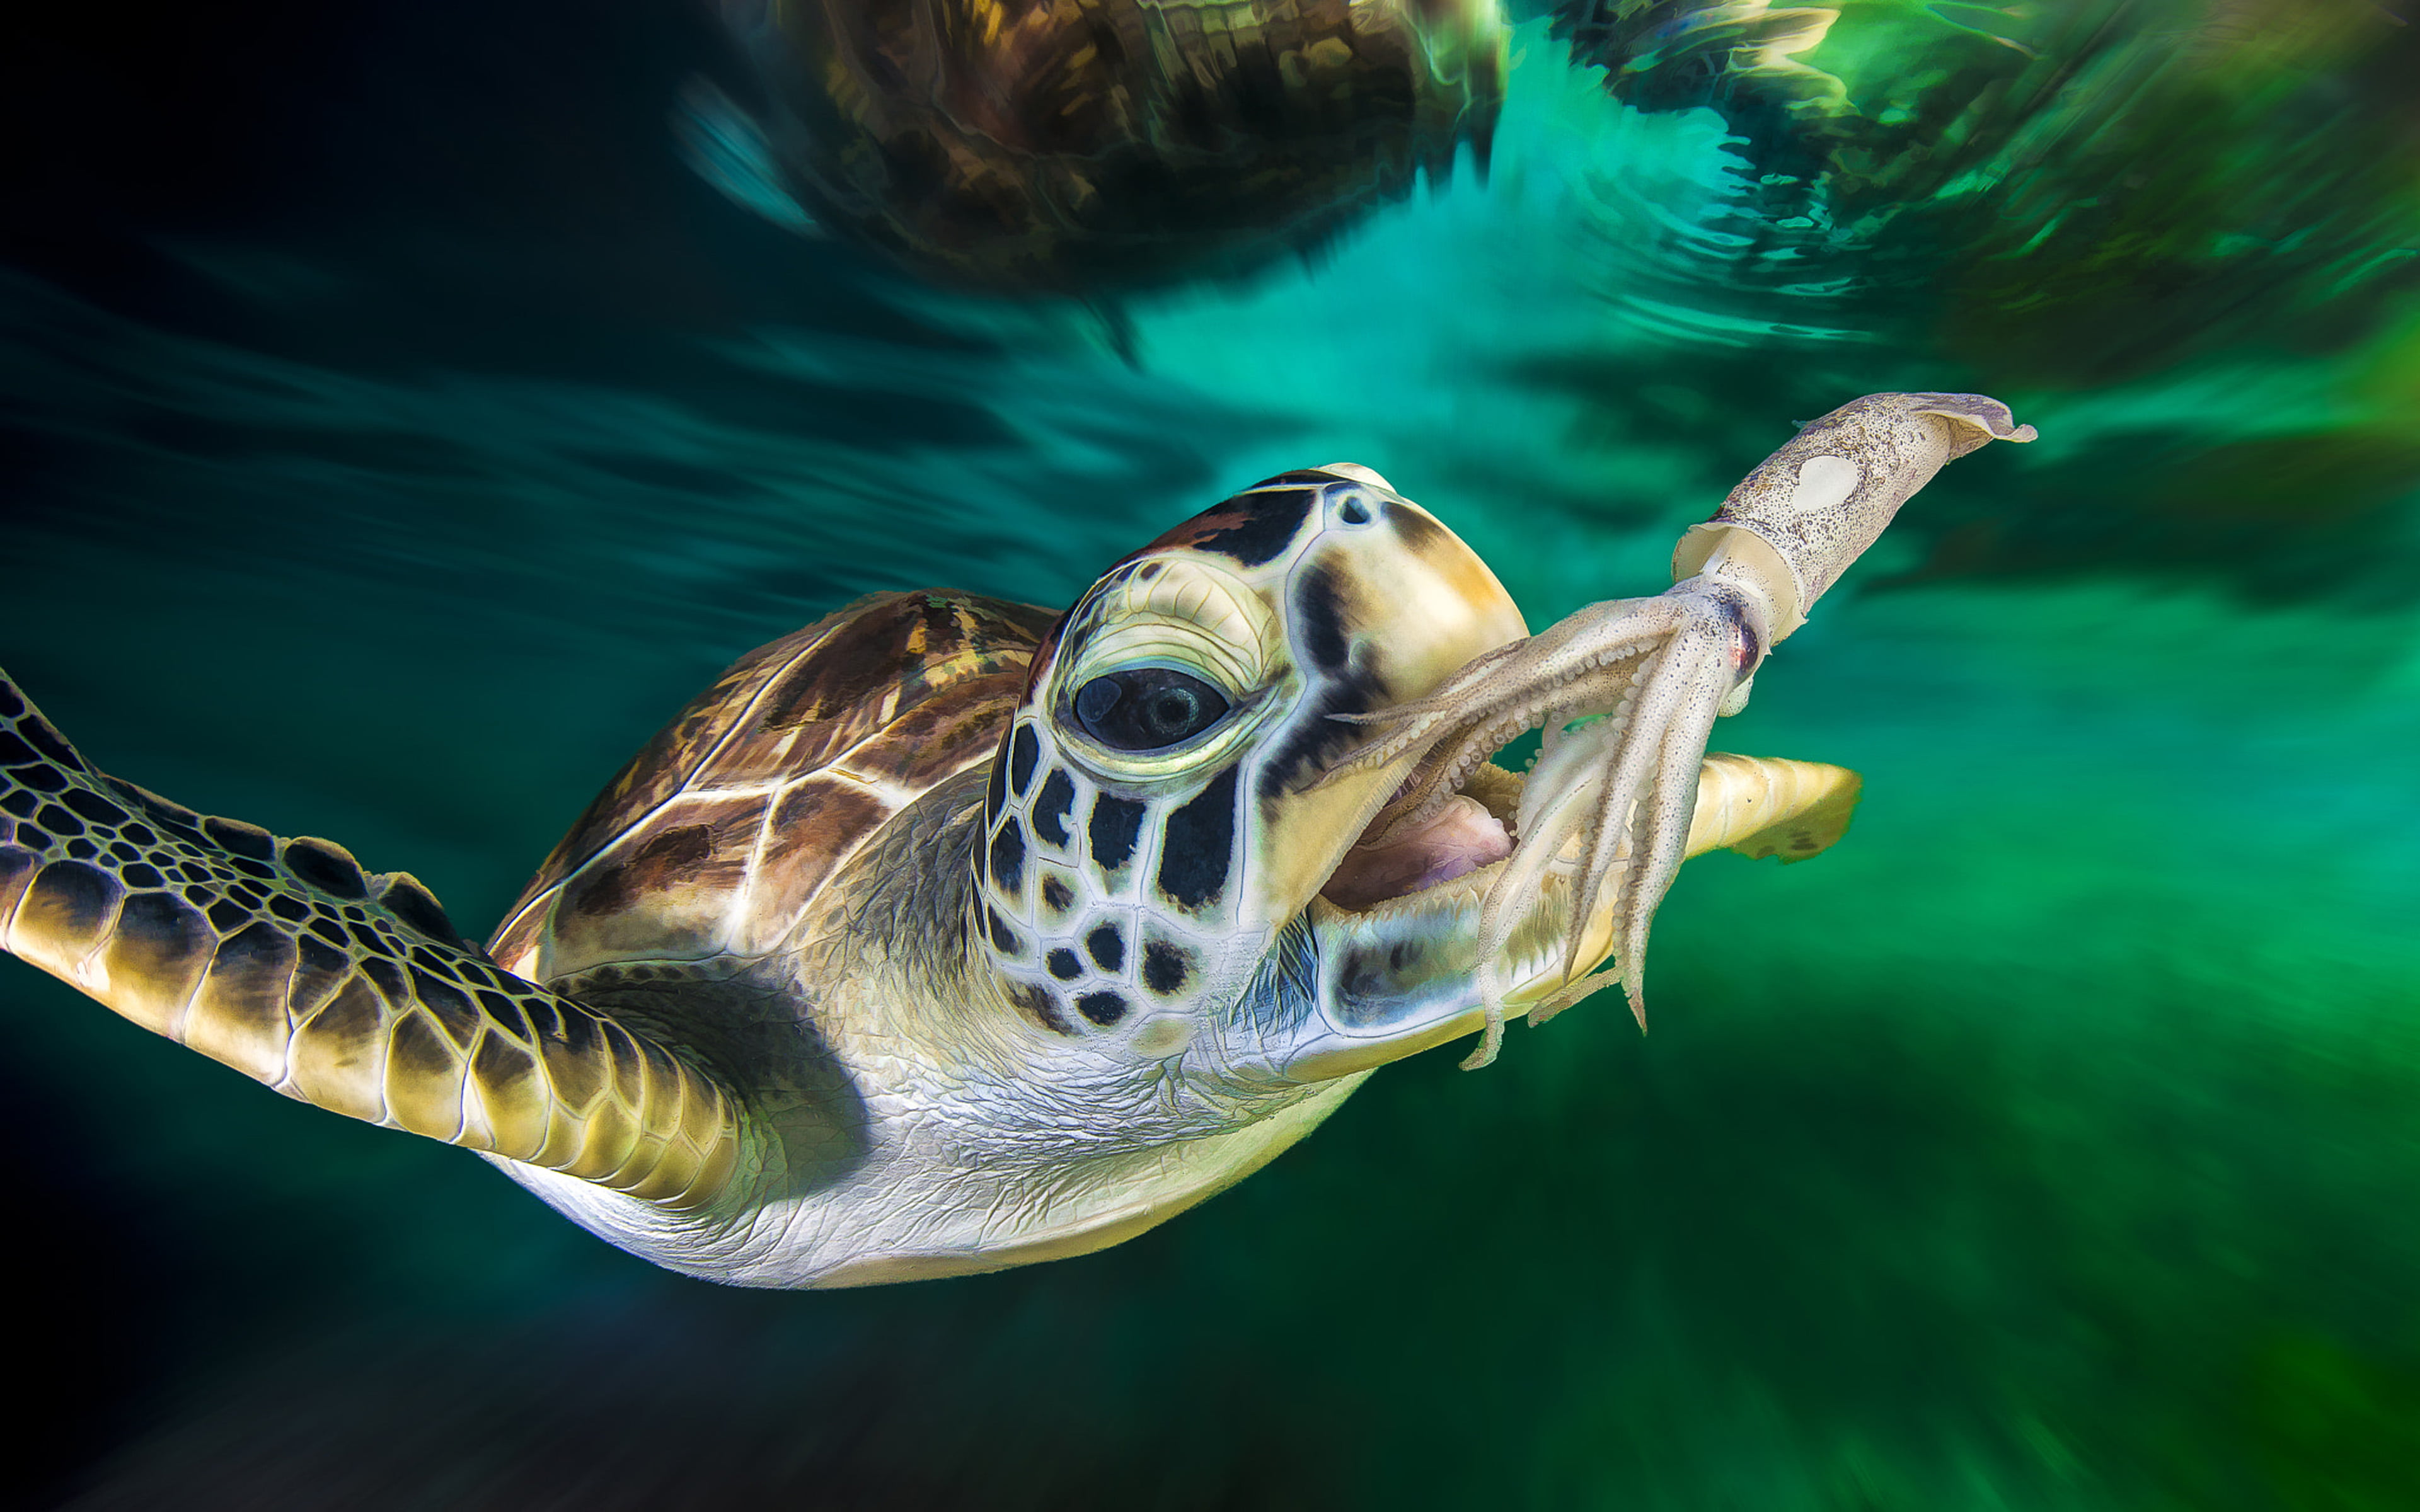 Green Sea Turtle And Squid Ocean Underwater Photo Desktop Hd Wallpaper For Pc Tablet And Mobile 3840×2400